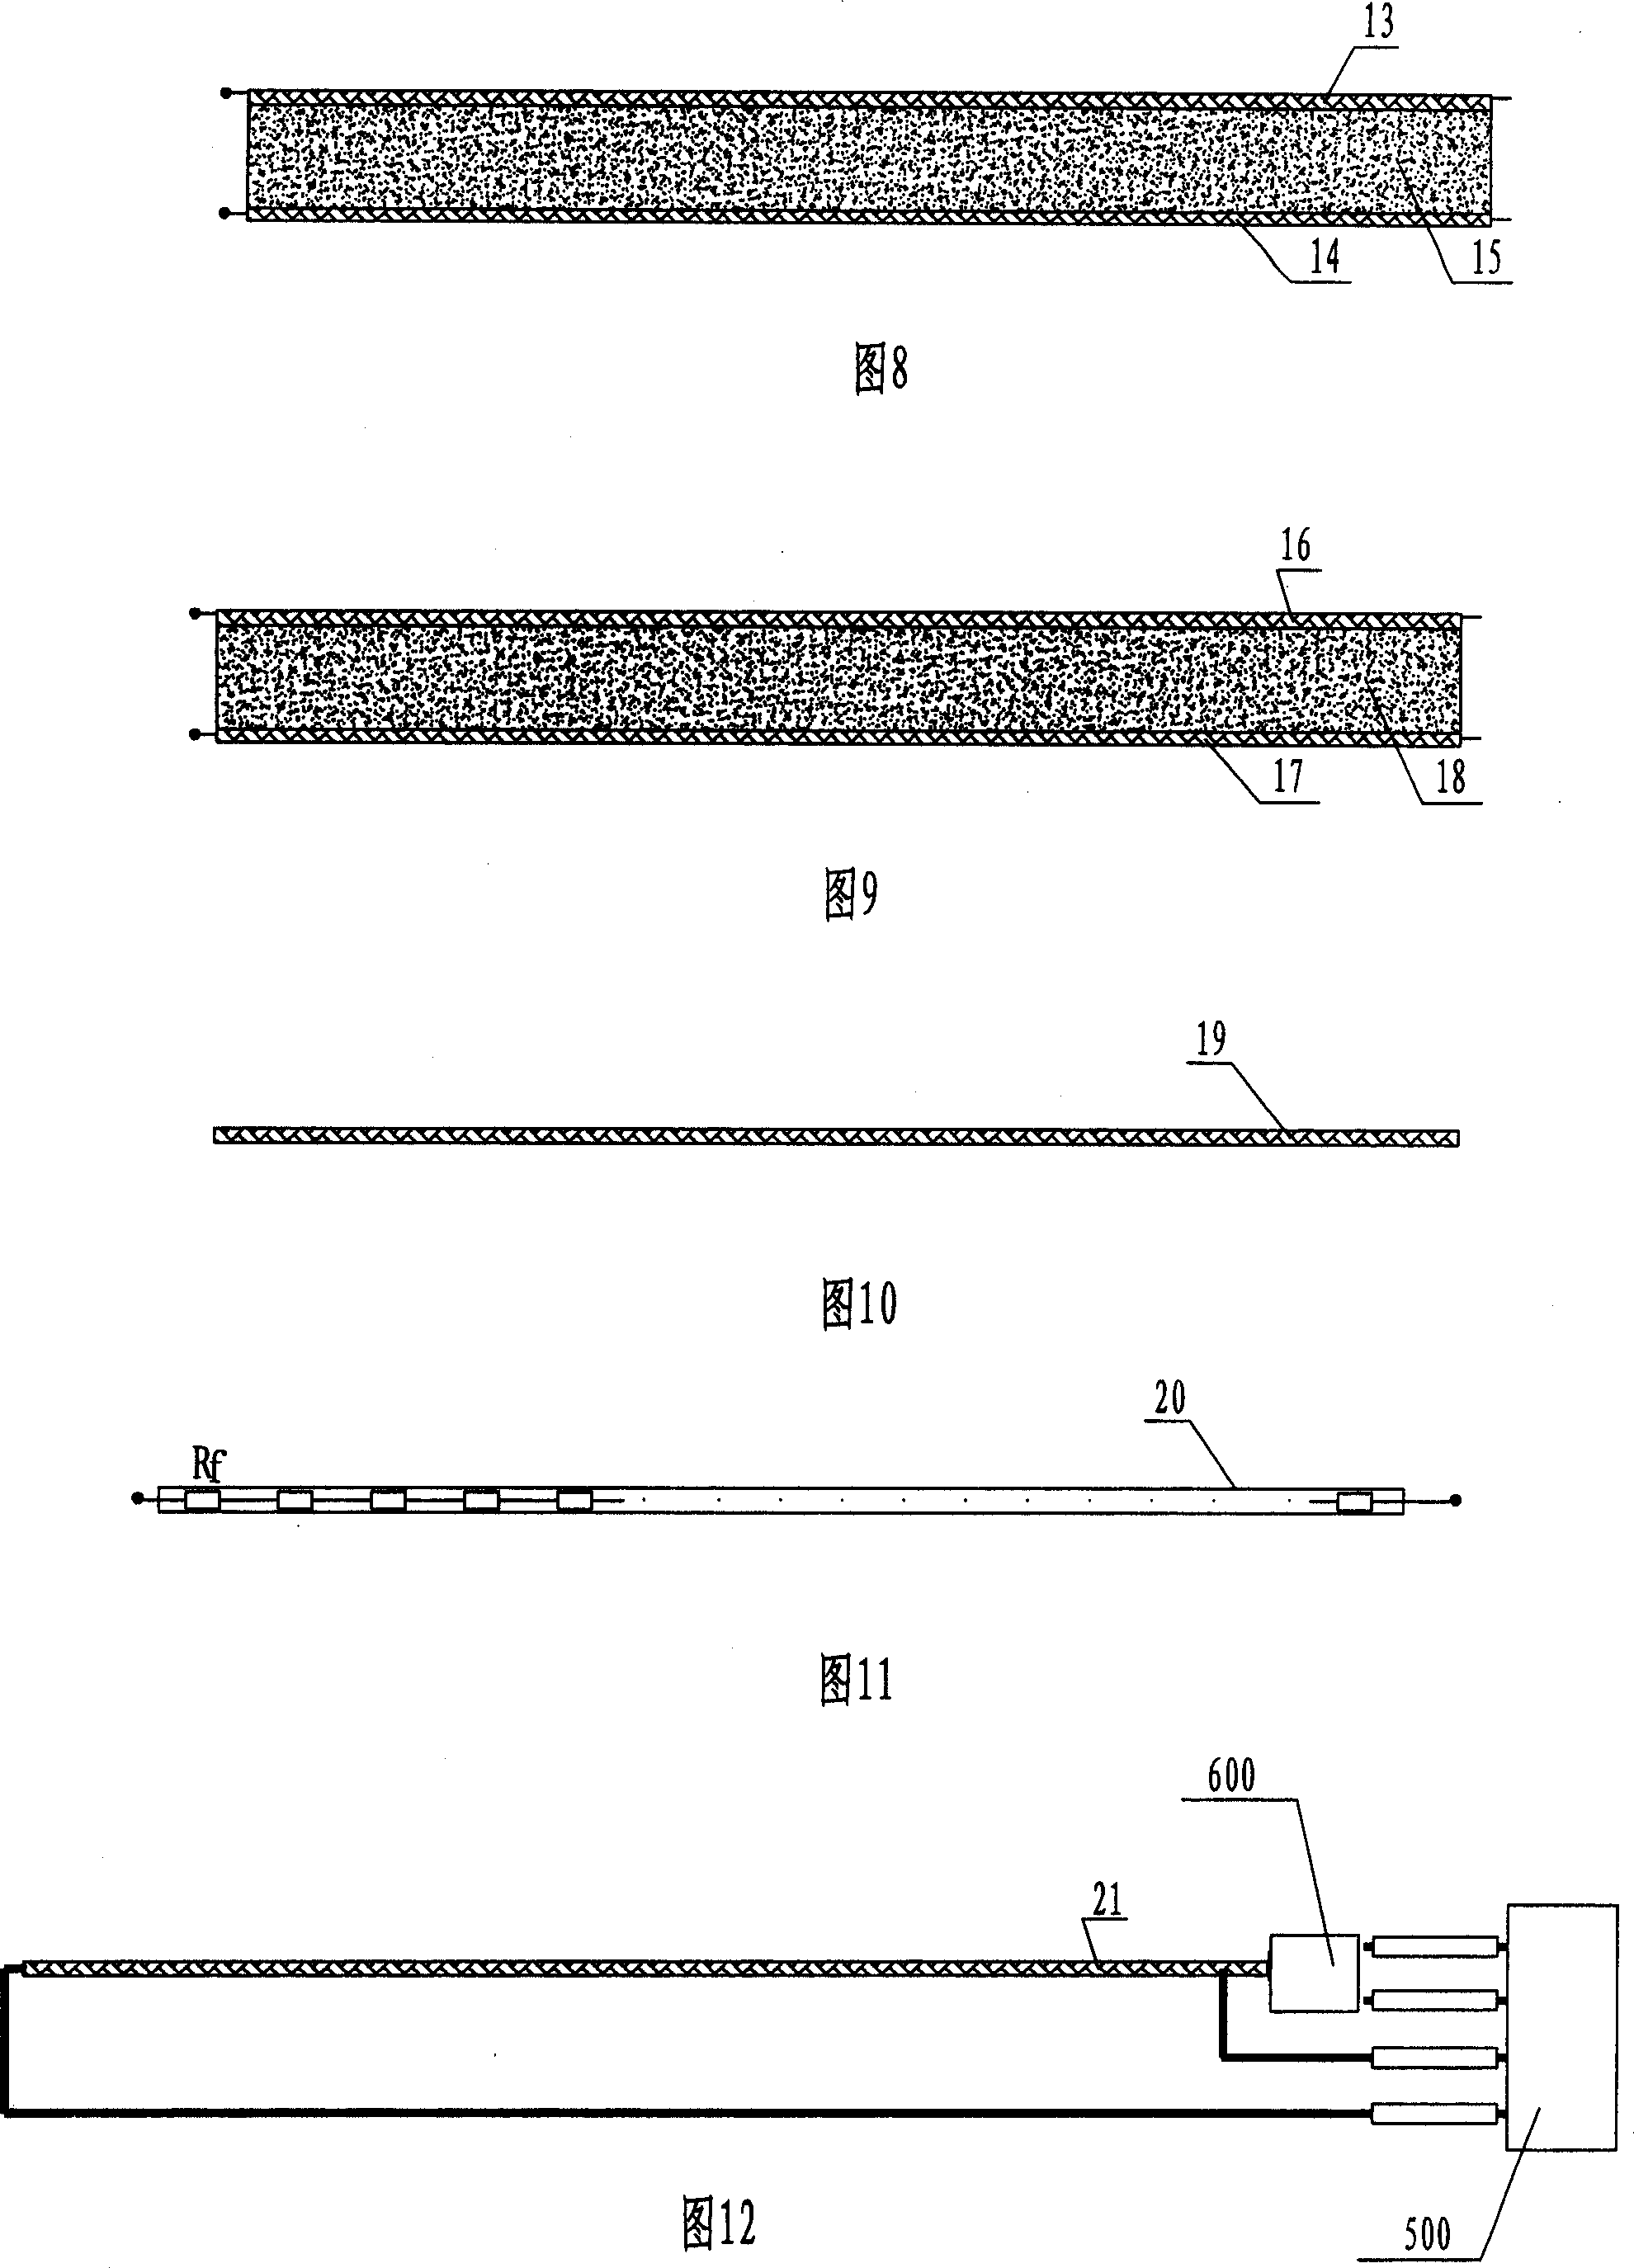 Composite line type temperature sensing fire detector and its data fusing warning method